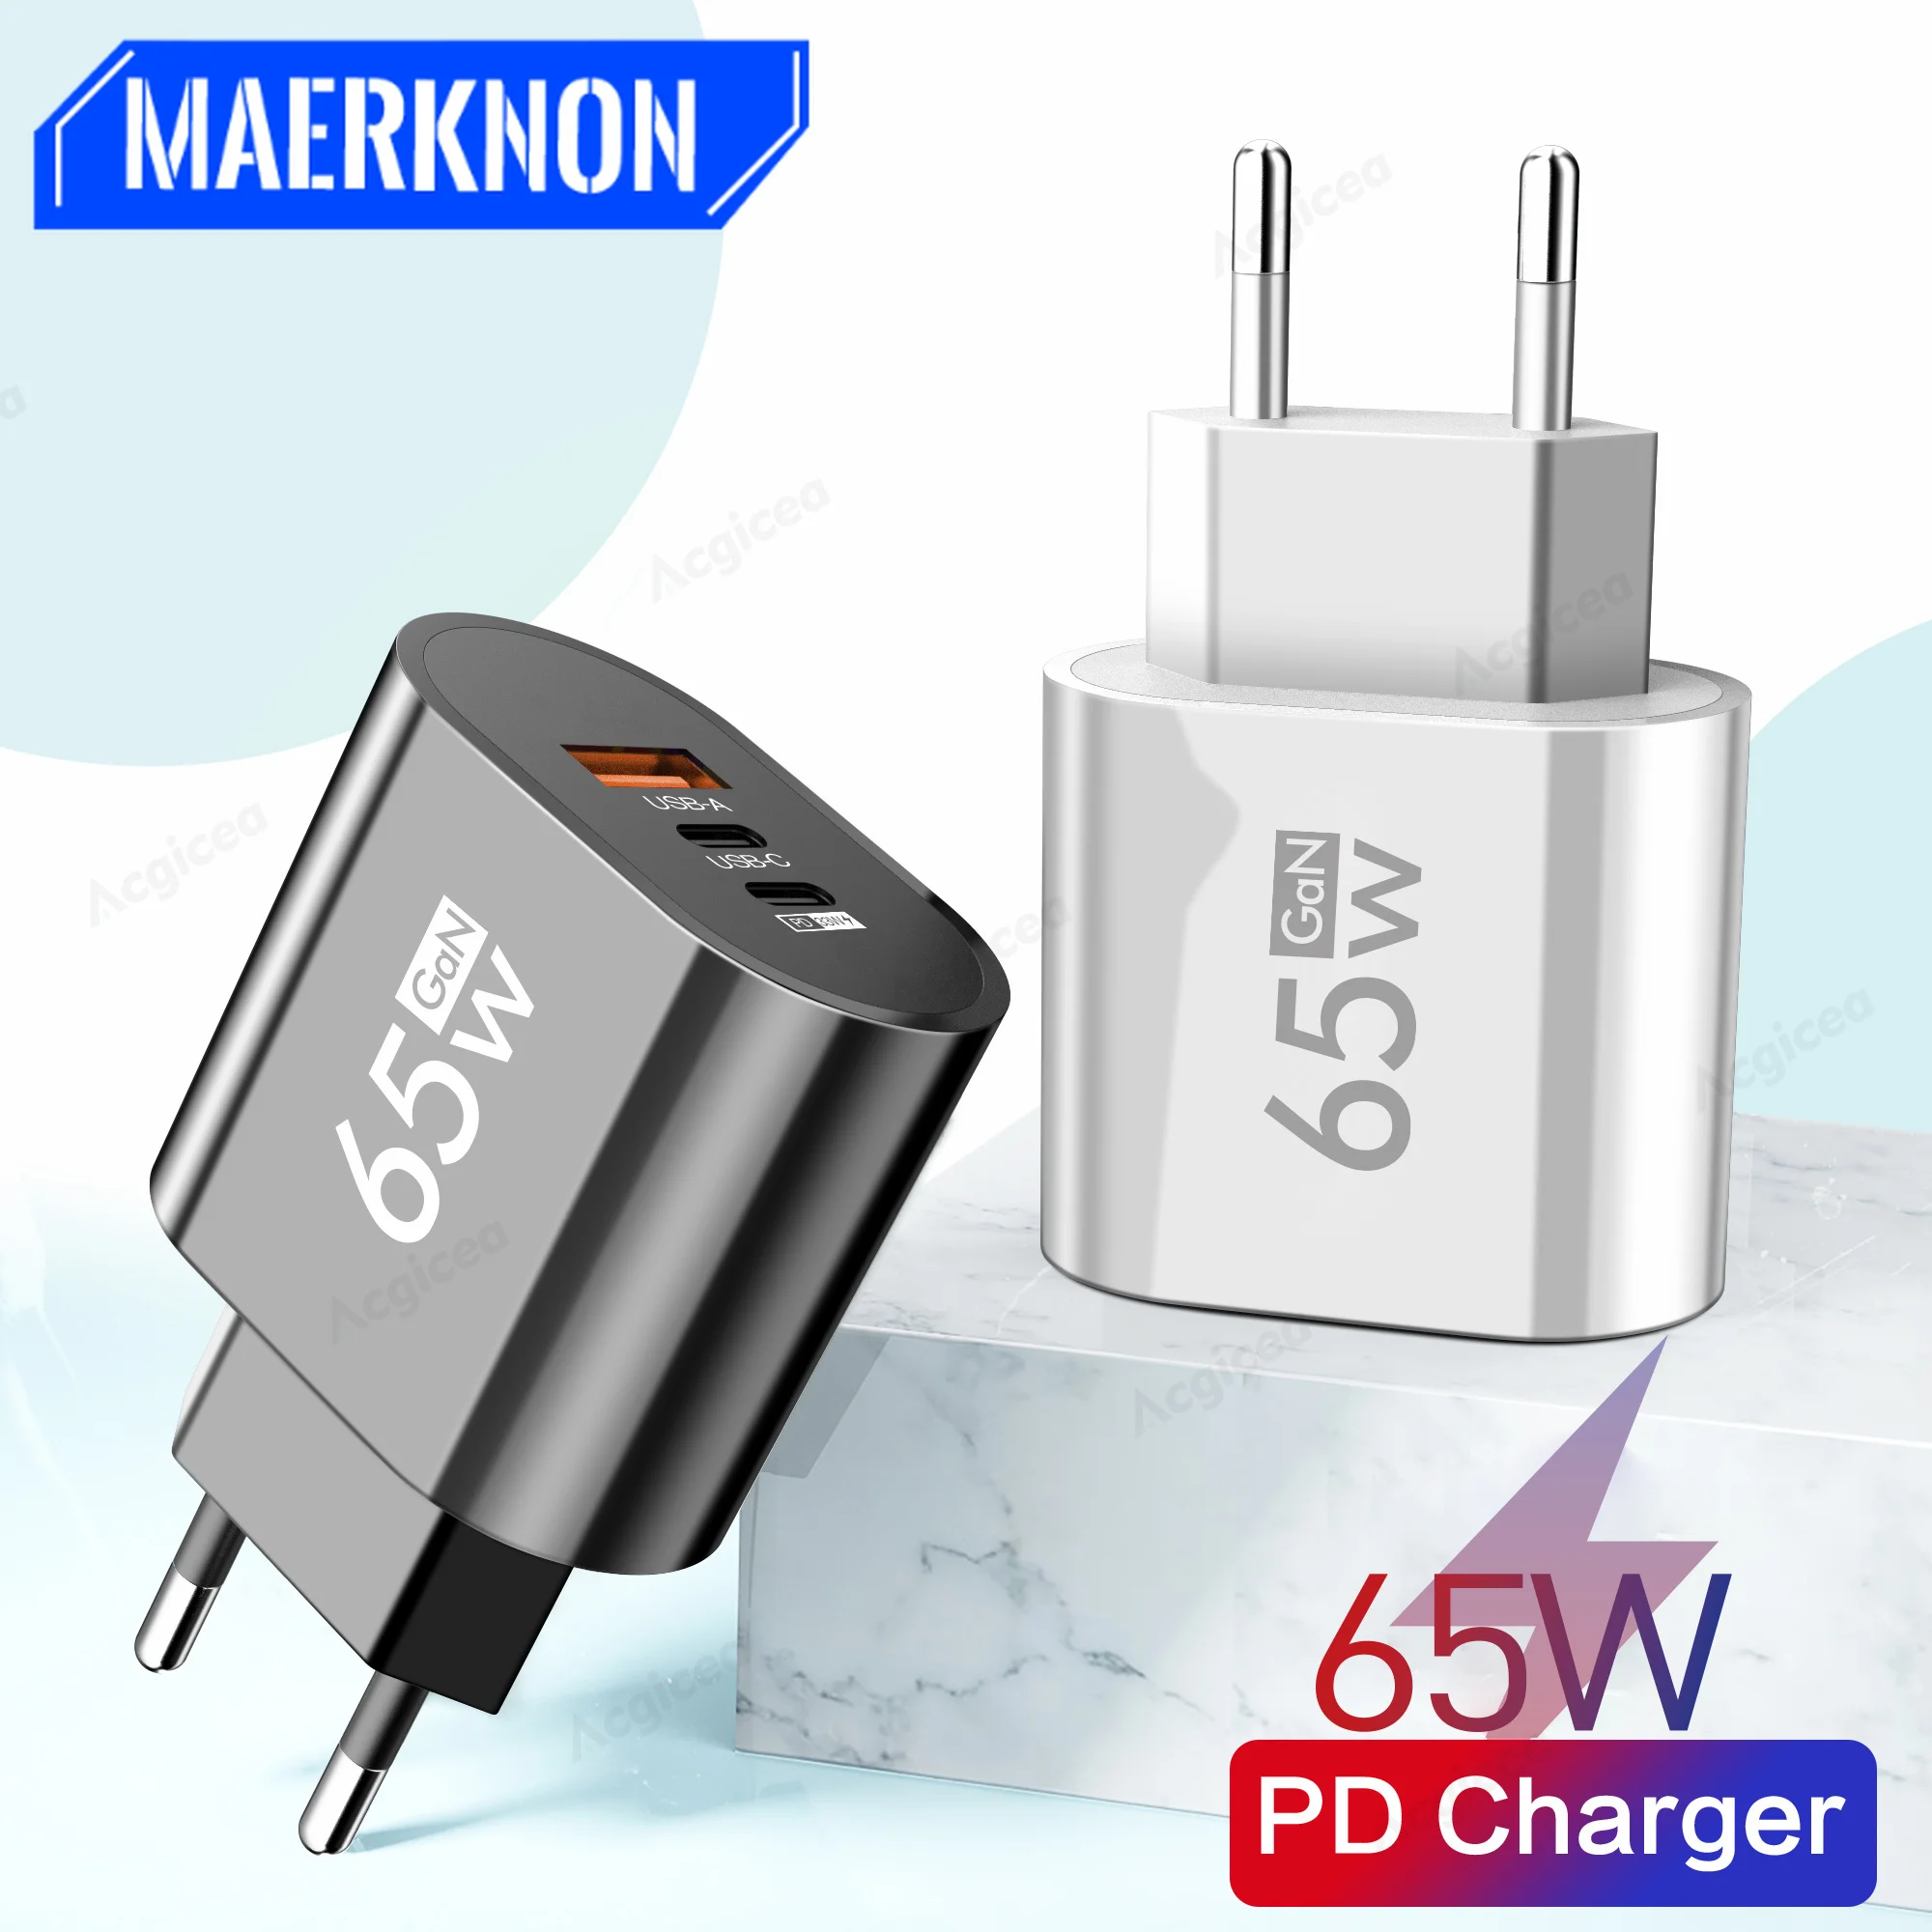 

65W GaN USB C Charger Quick Charge 3.0 4.0 33W PD USB Type C Fast Phone Charger Adapter For iPhone 14 13 Pro Xiaomi Poco Samsung